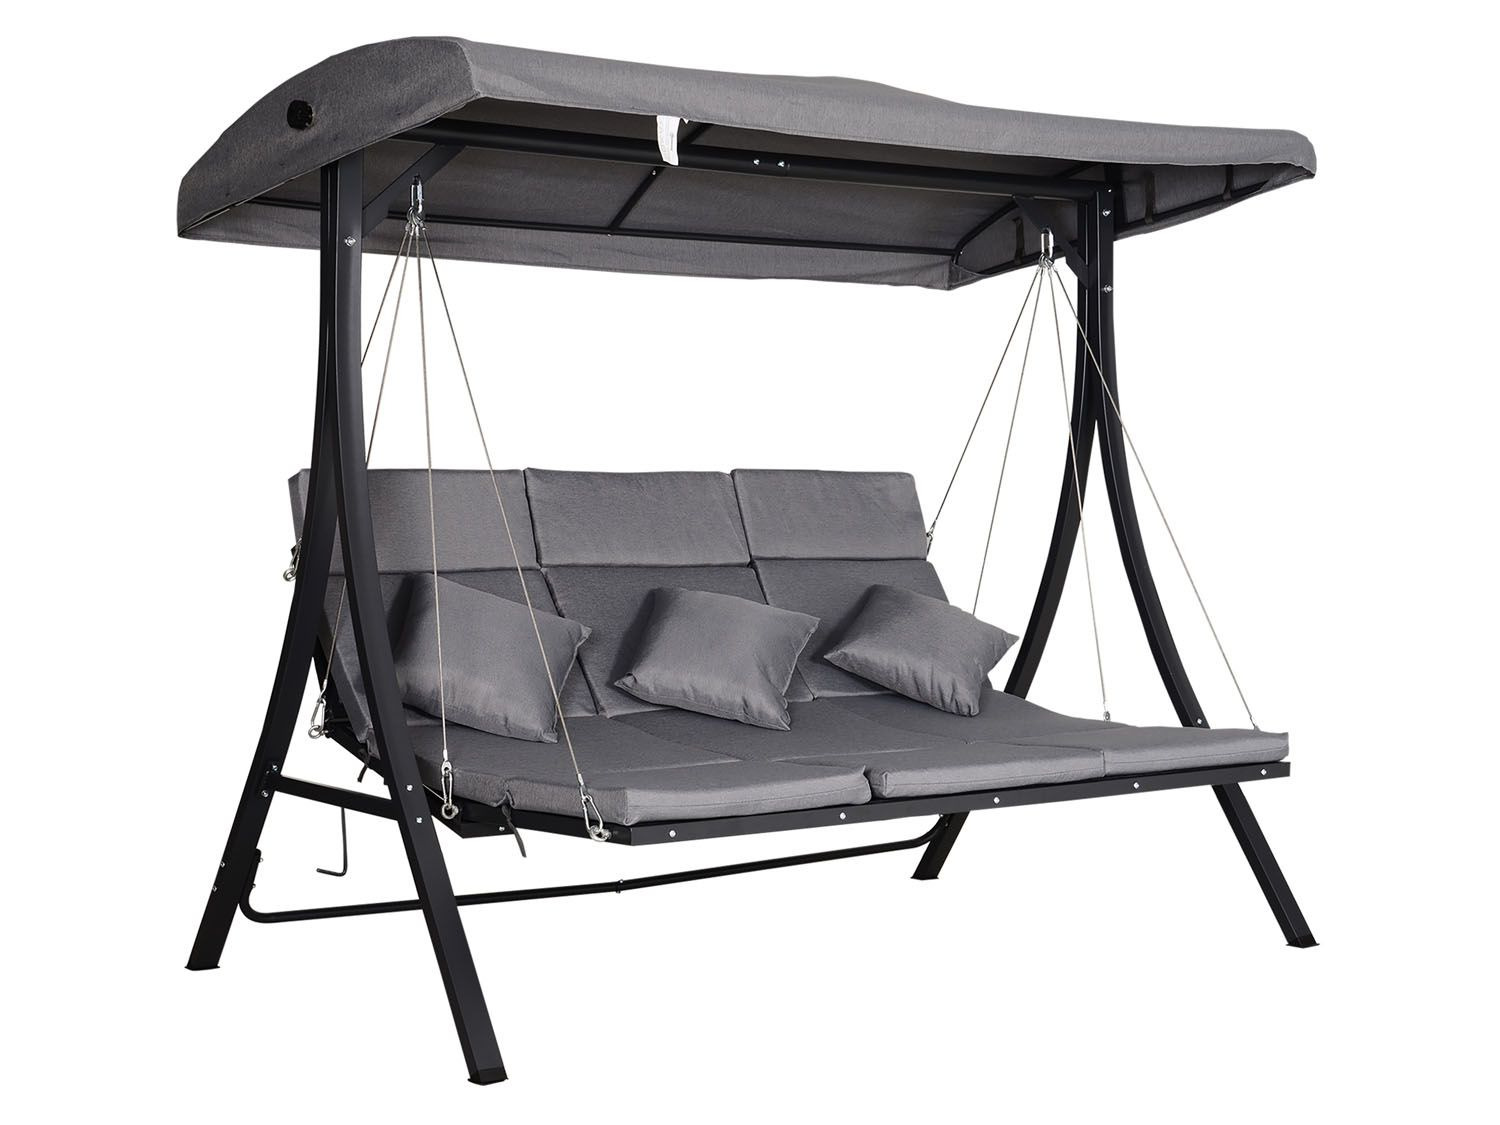 Outsunny Hollywoodschaukel Lounge, 3-Sitzer | LIDL